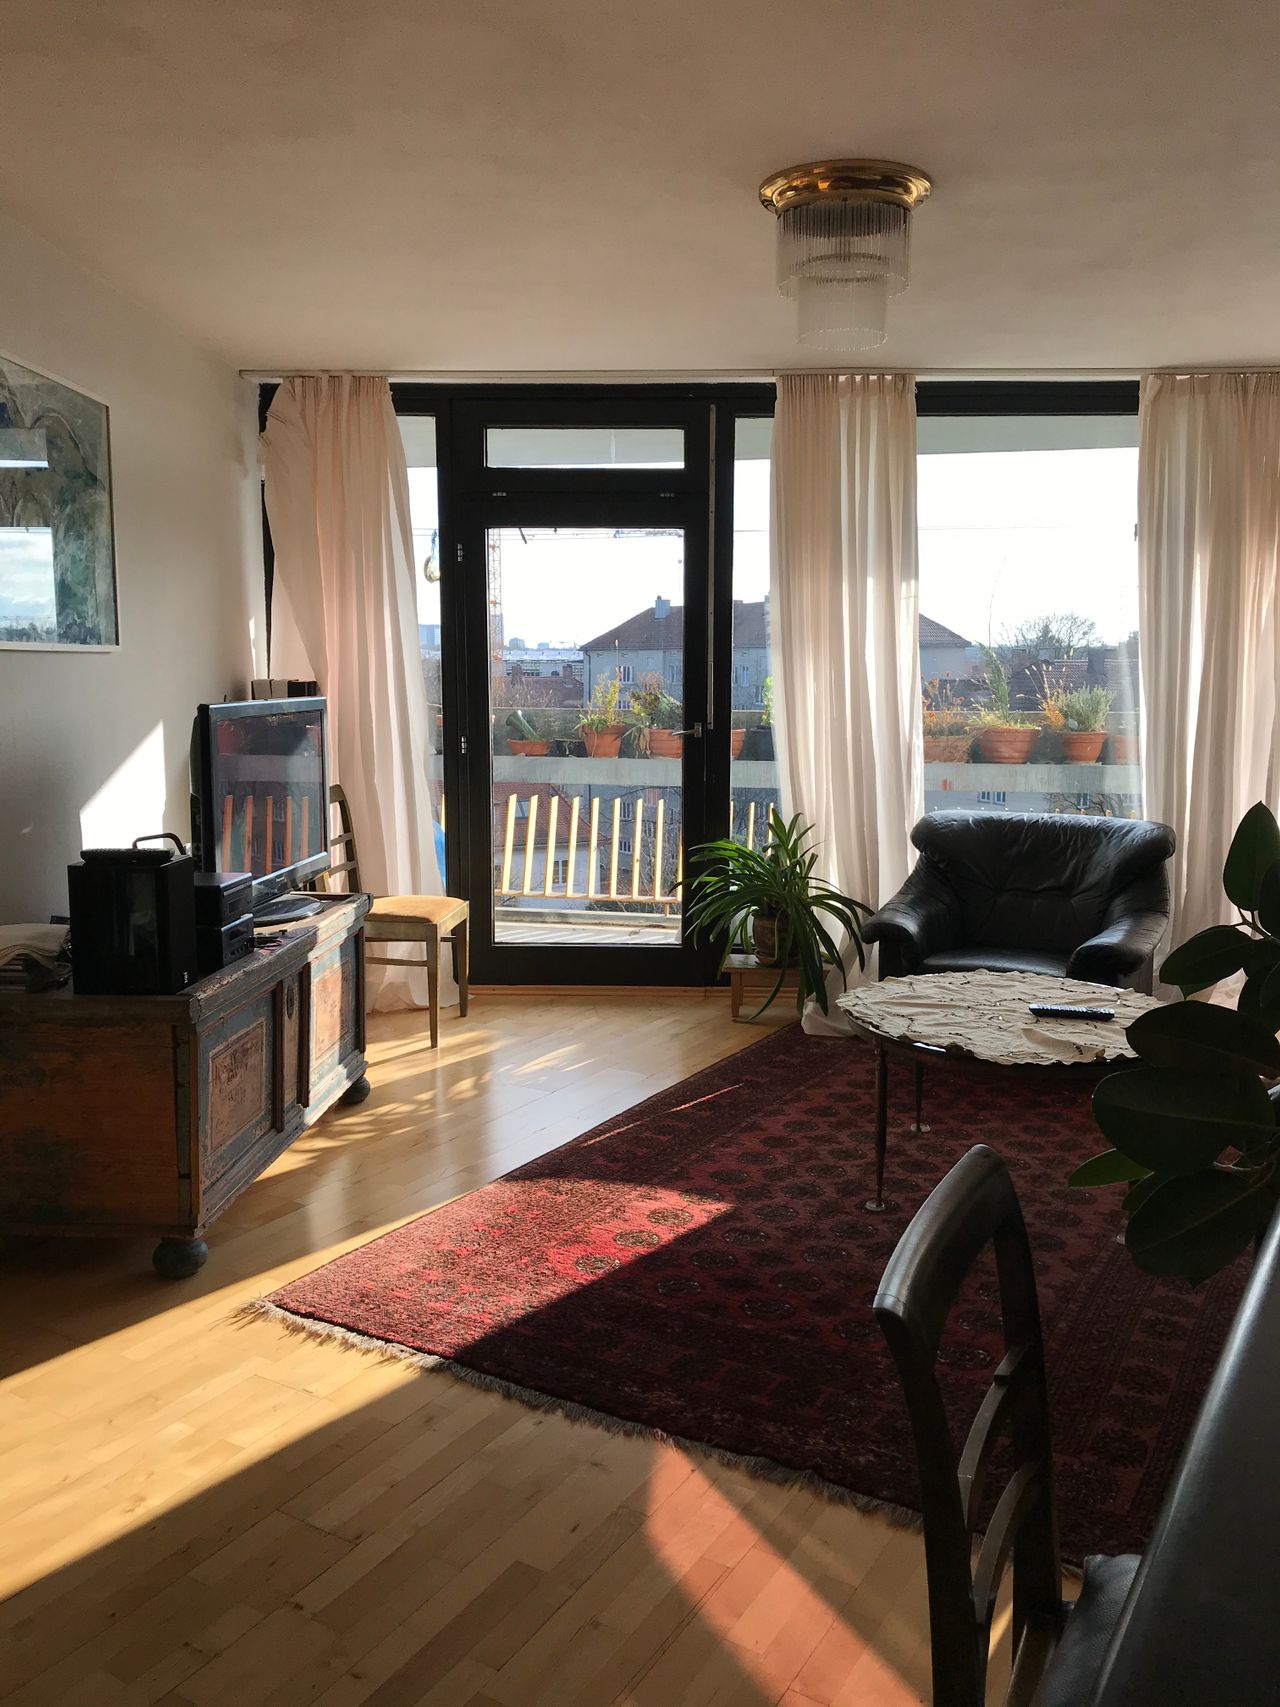 Spacious, new home located in München